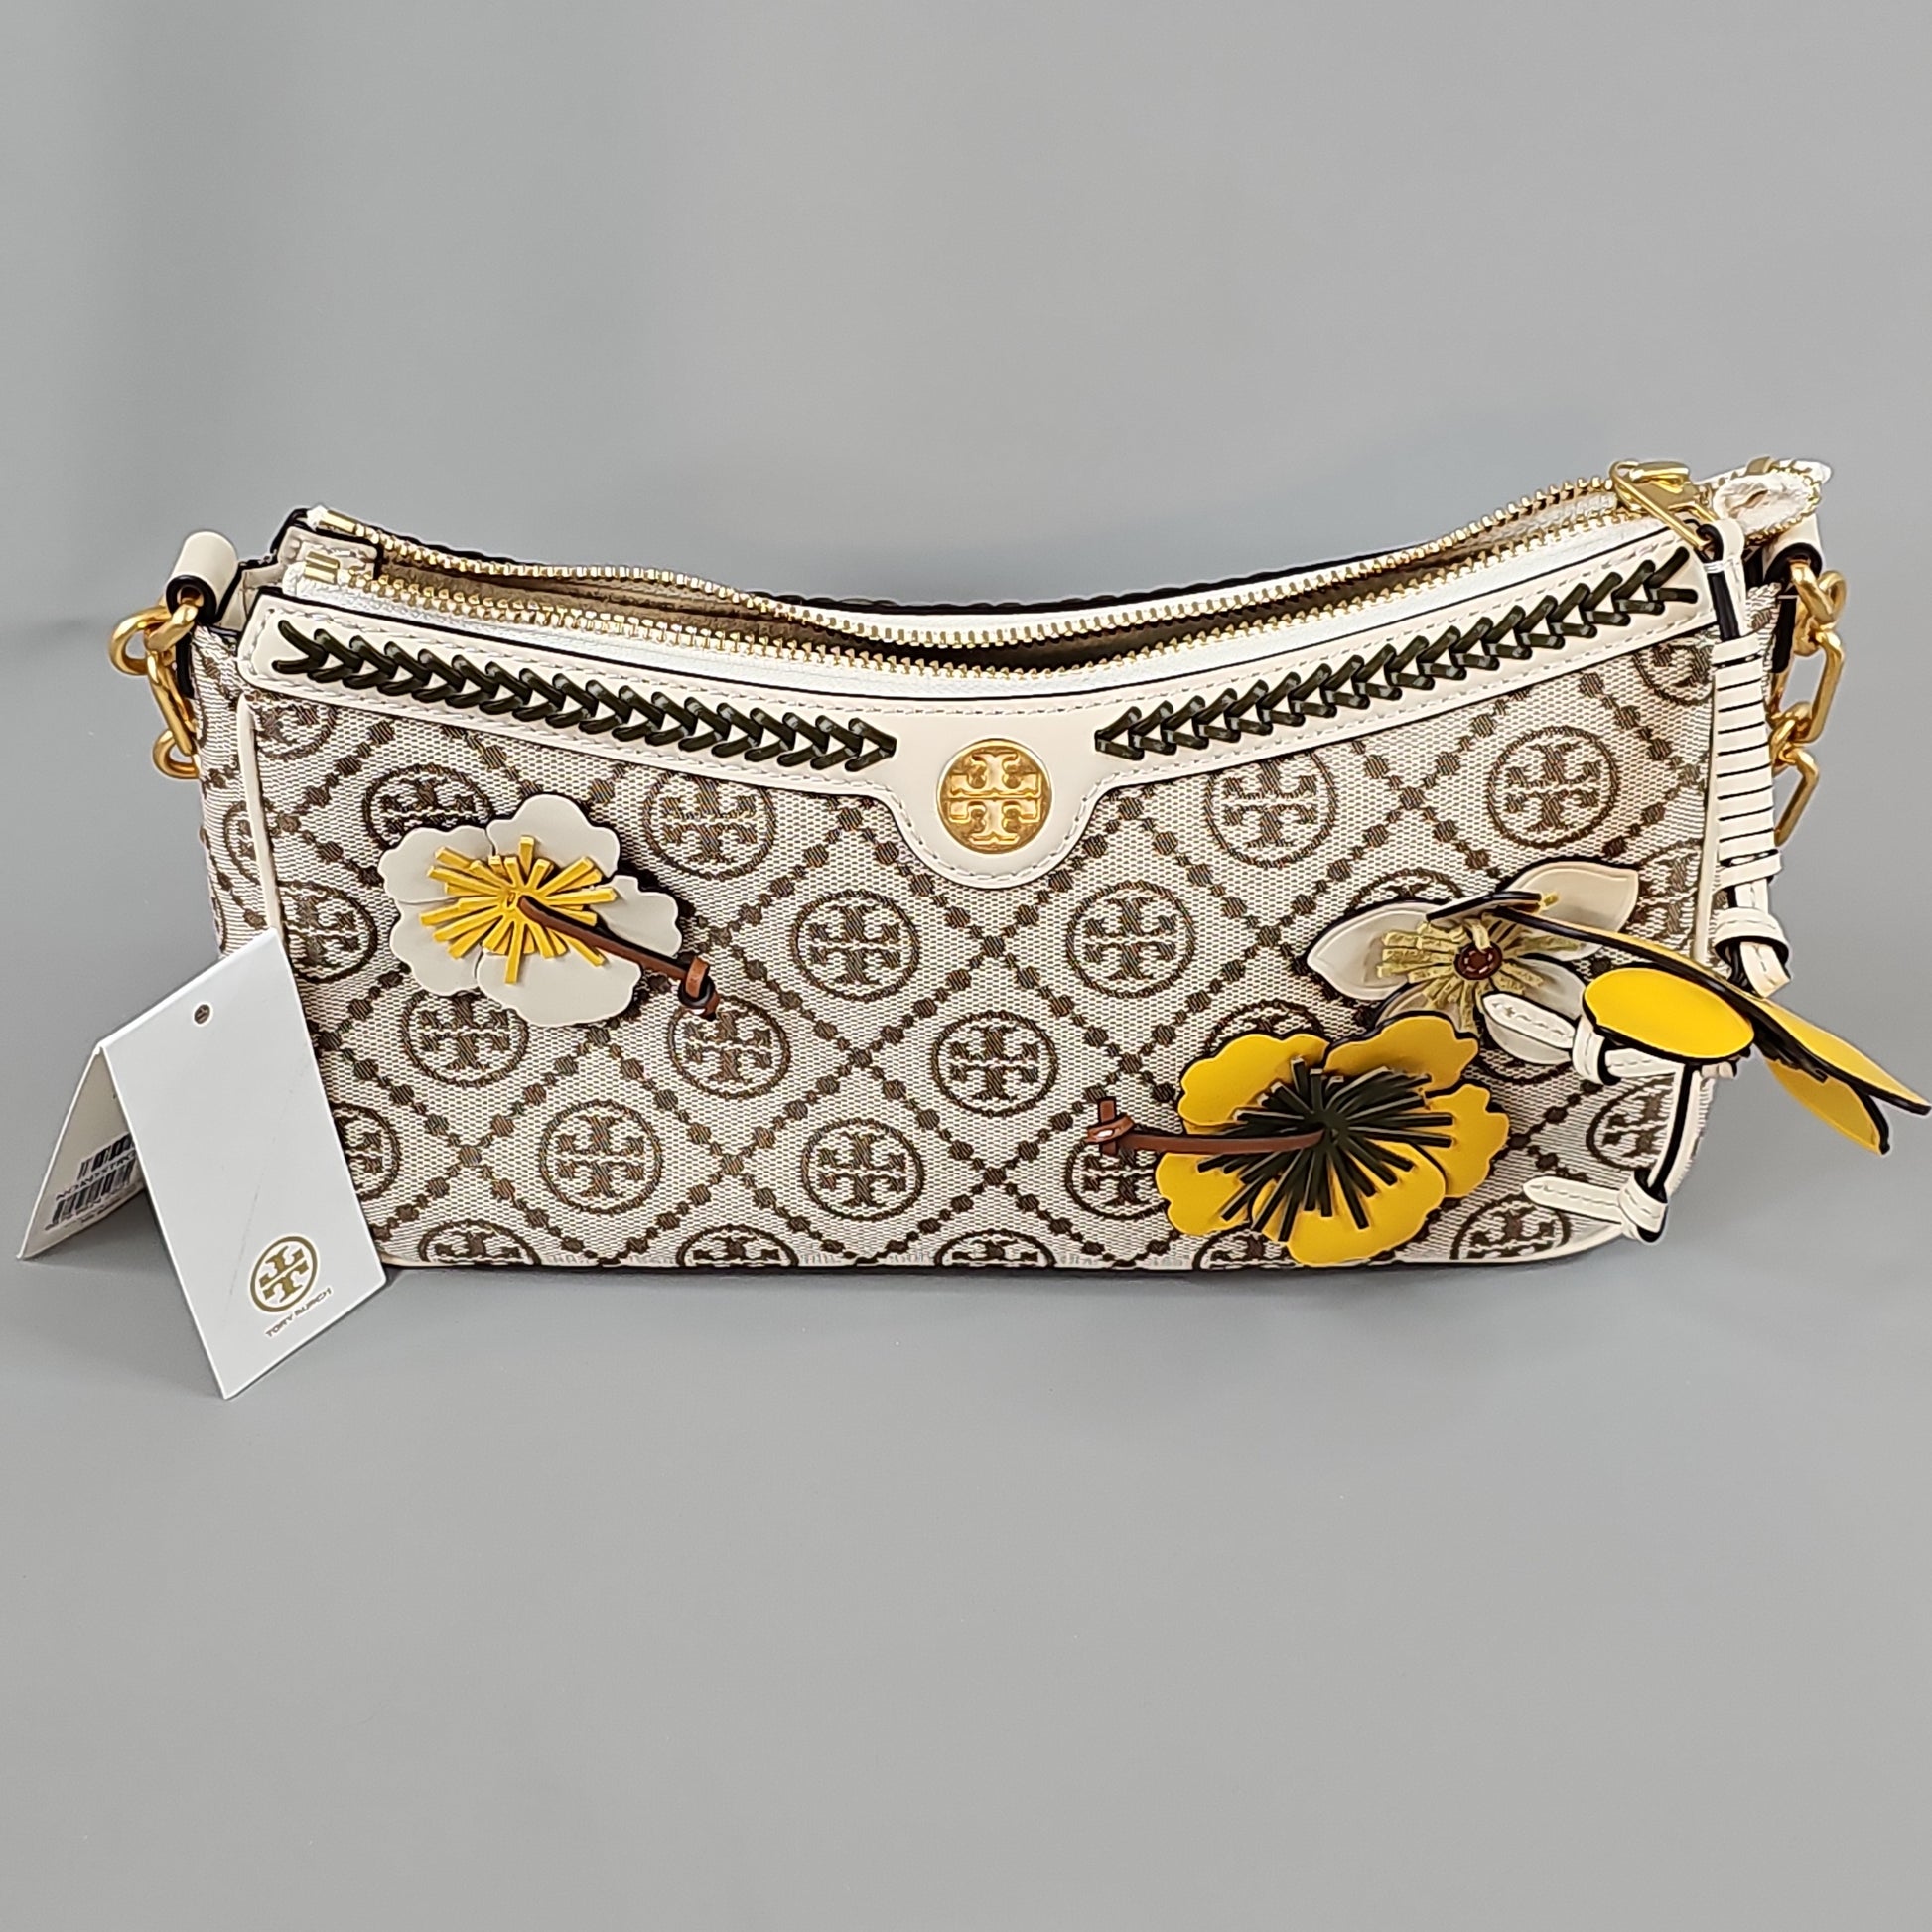 T.O.R.Y B.U.R.C.H 80862 T Monogram in Hazel / Gardenia Woven Jacquard  Embroidered with Fine Leather Trim Zip Camera Bag - Women's Bag